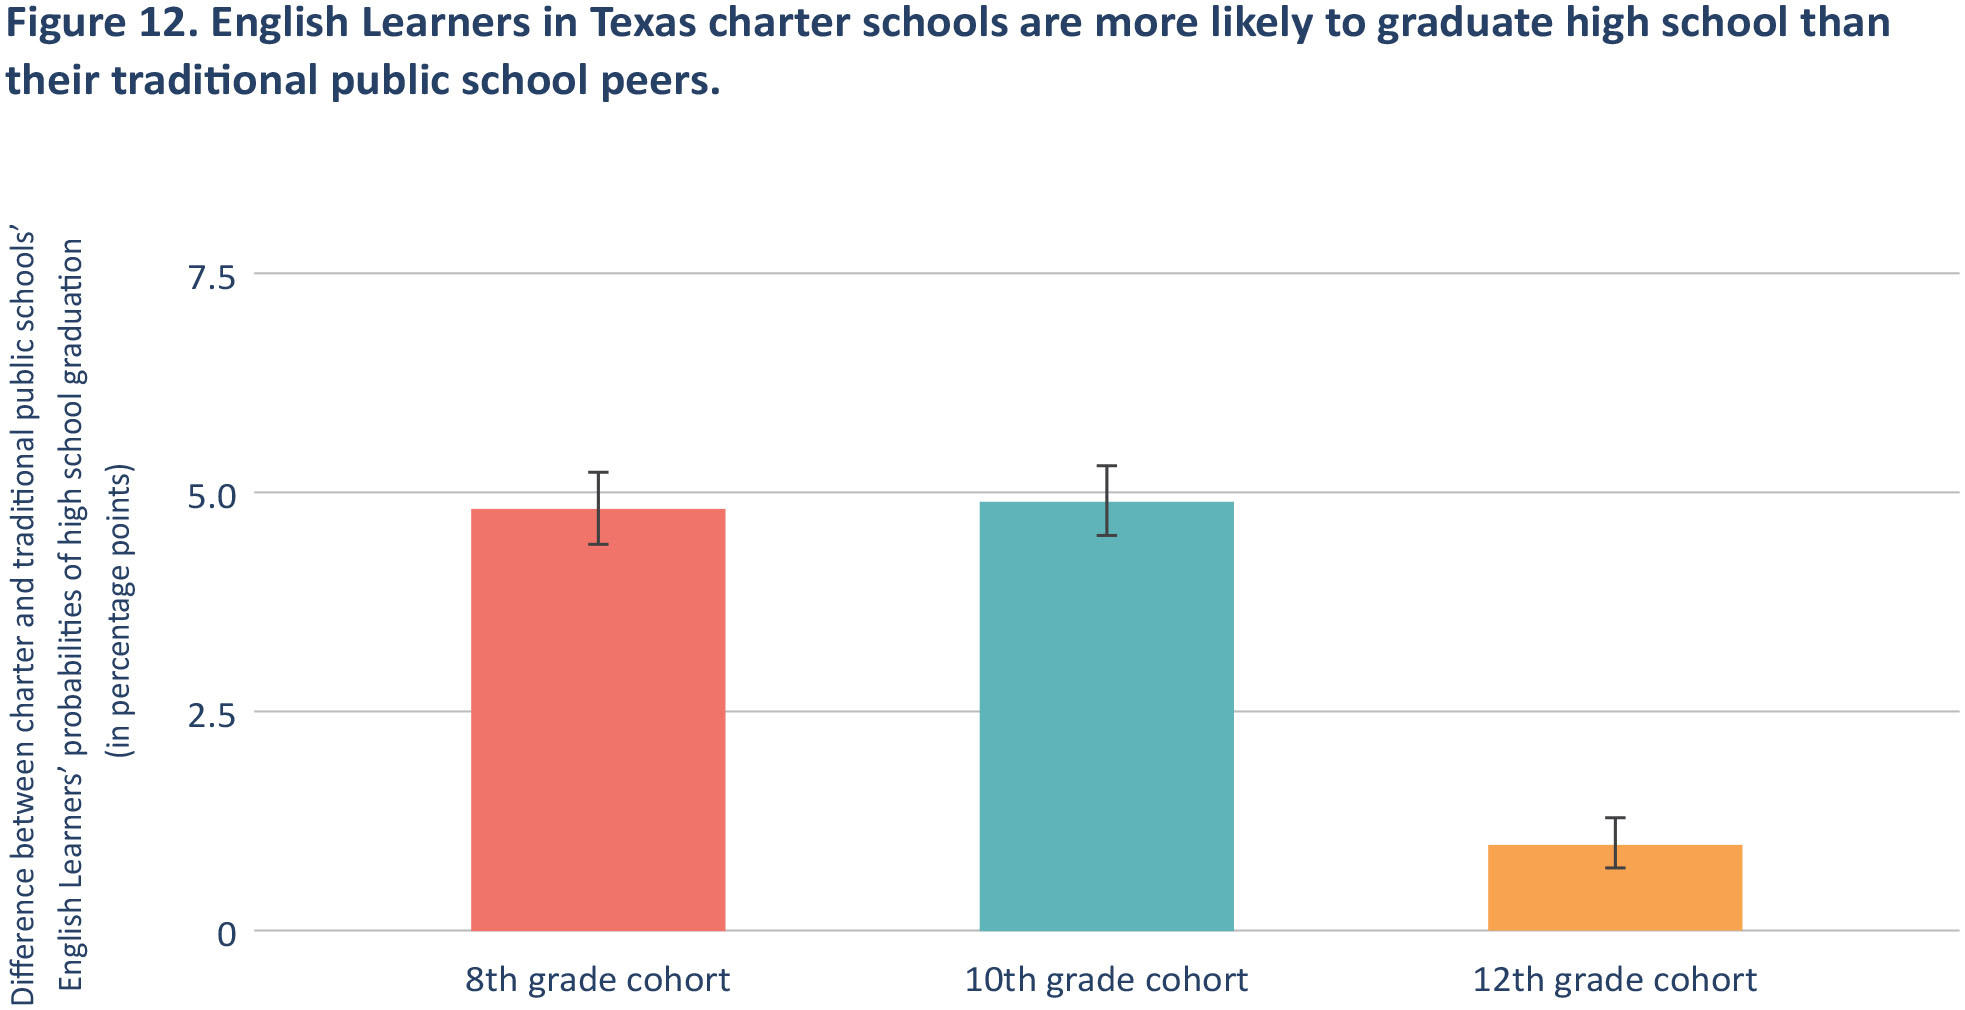 Figure 12. English Learners in Texas charter schools are more likely to graduate high school than their traditional public school peers.